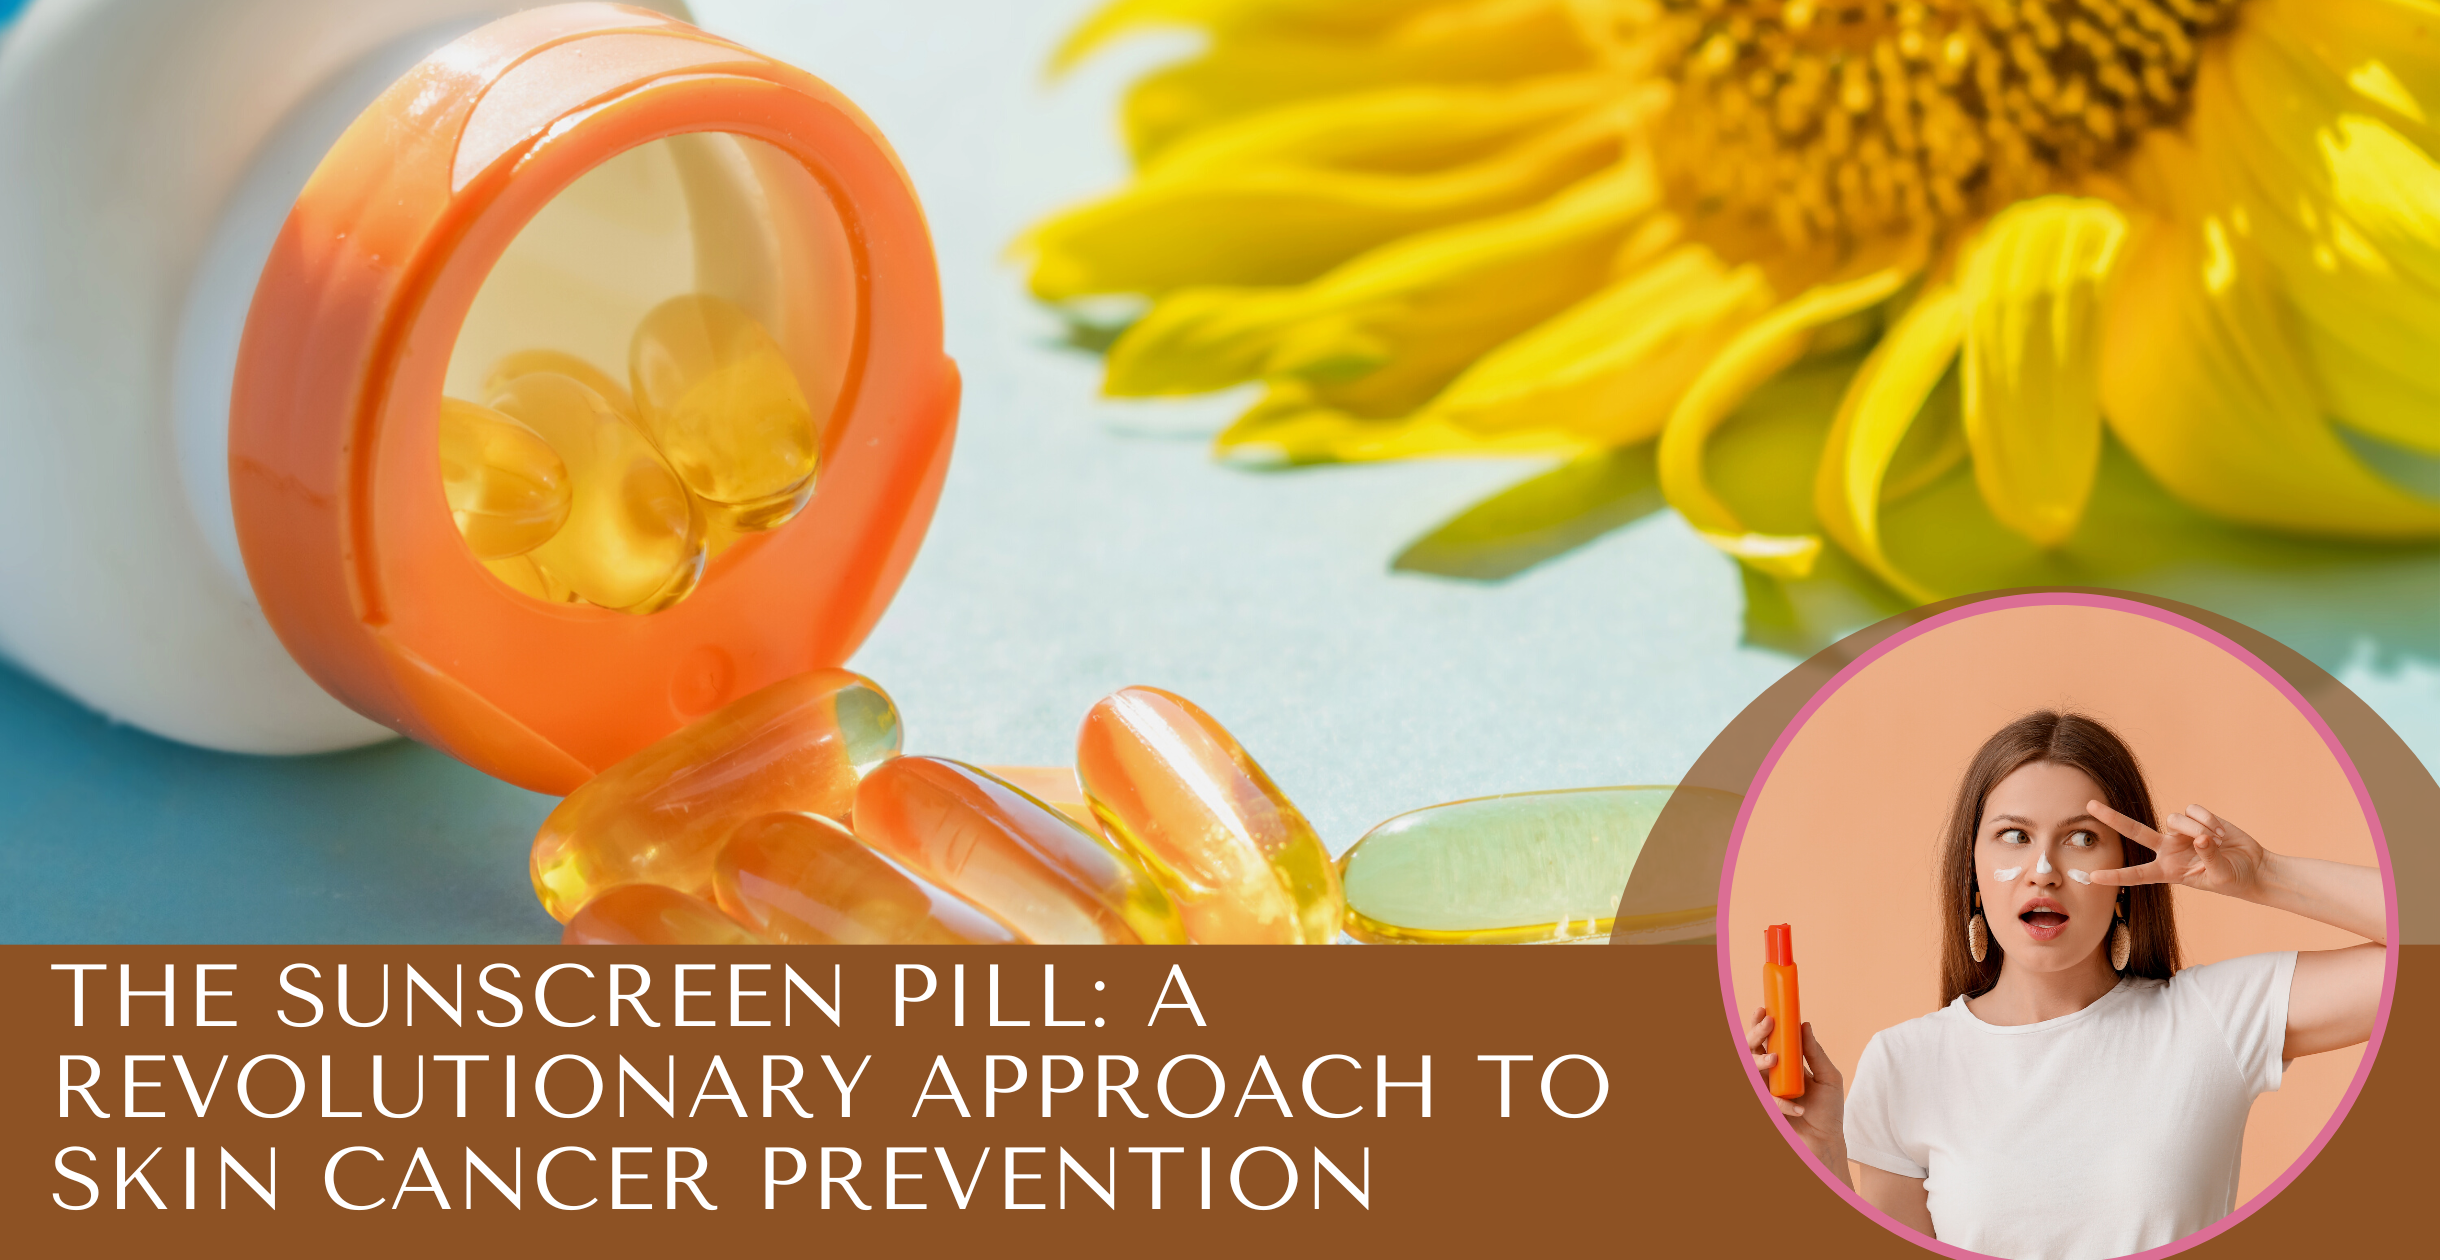 The Sunscreen Pill: A Revolutionary Approach to Skin Cancer Prevention